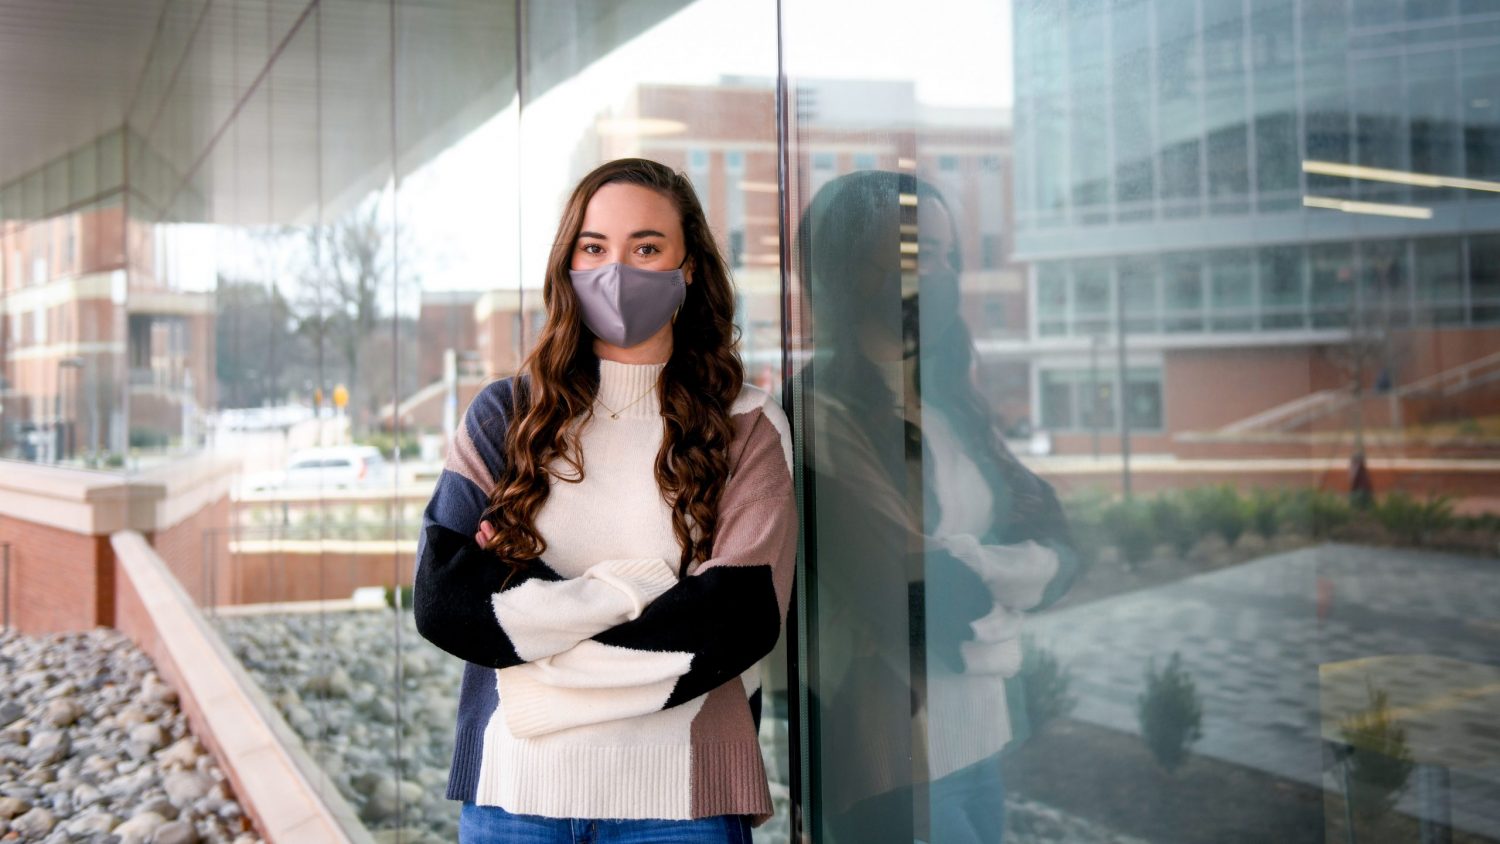 Victoria Moore poses in front of the WellRec Center while wearing a face covering